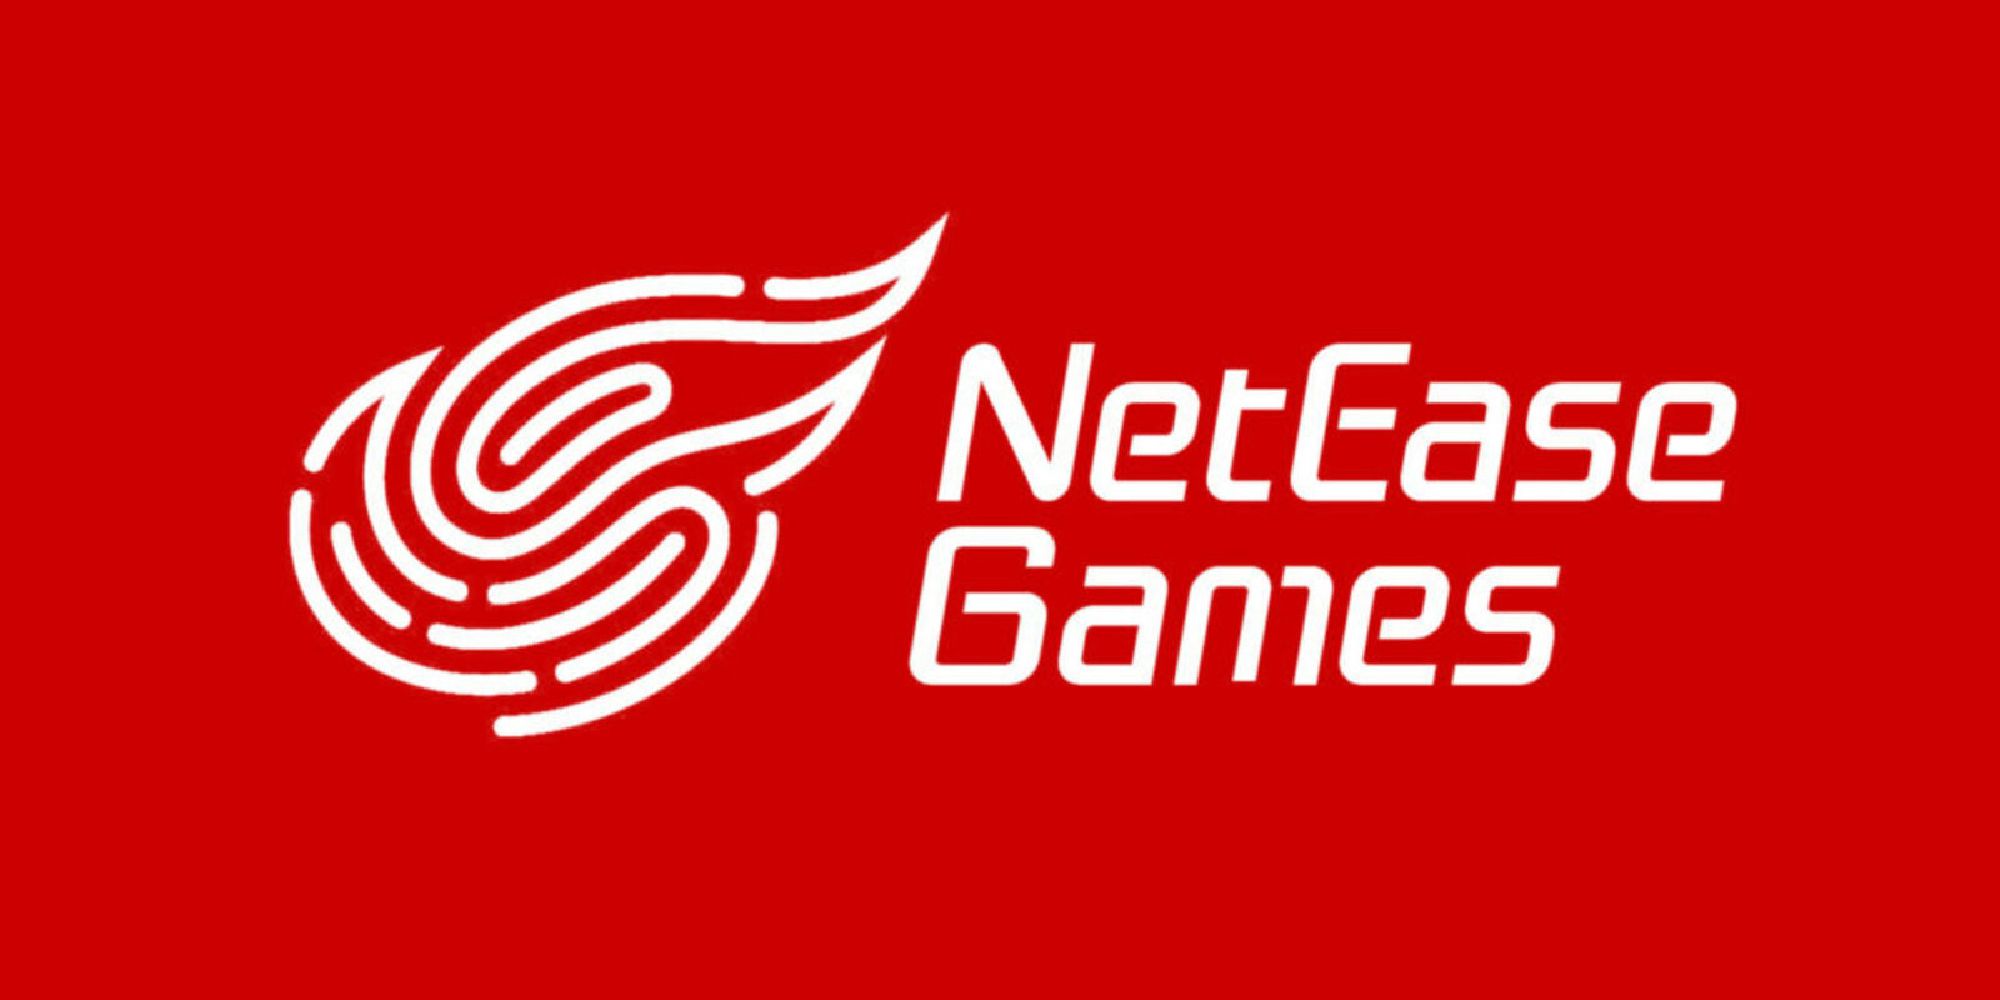 netease games logo on a red background